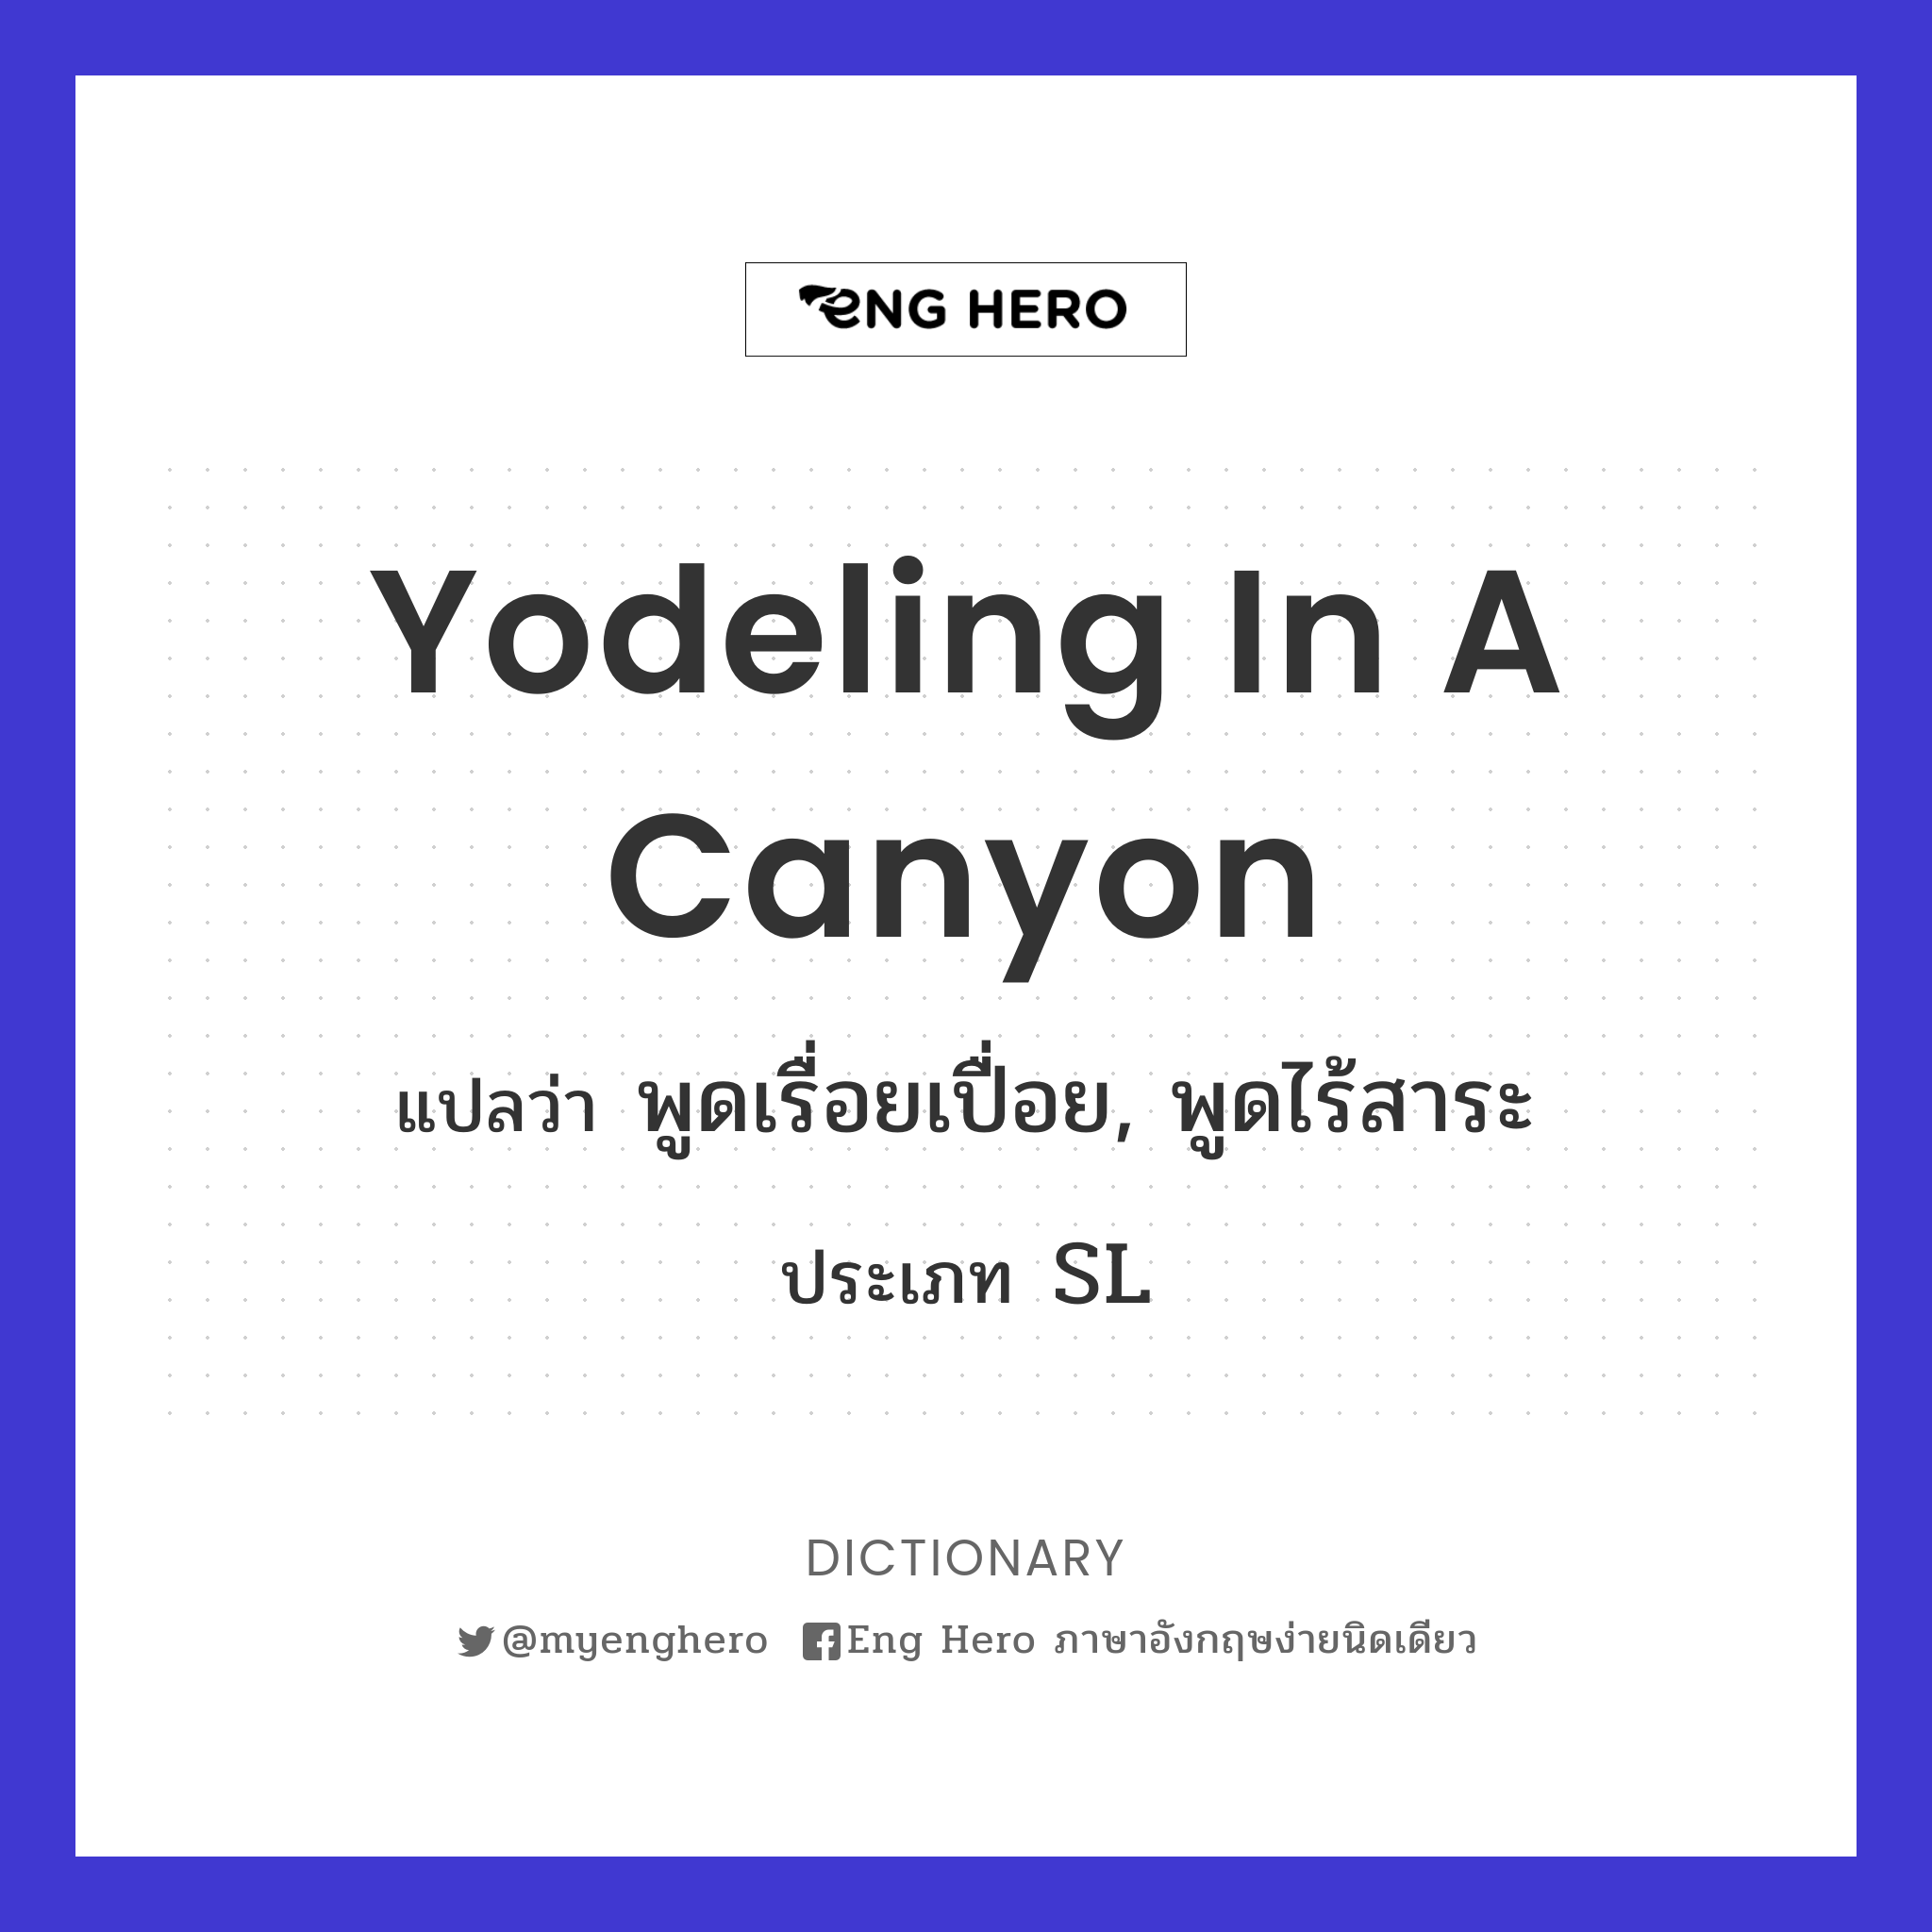 yodeling in a canyon